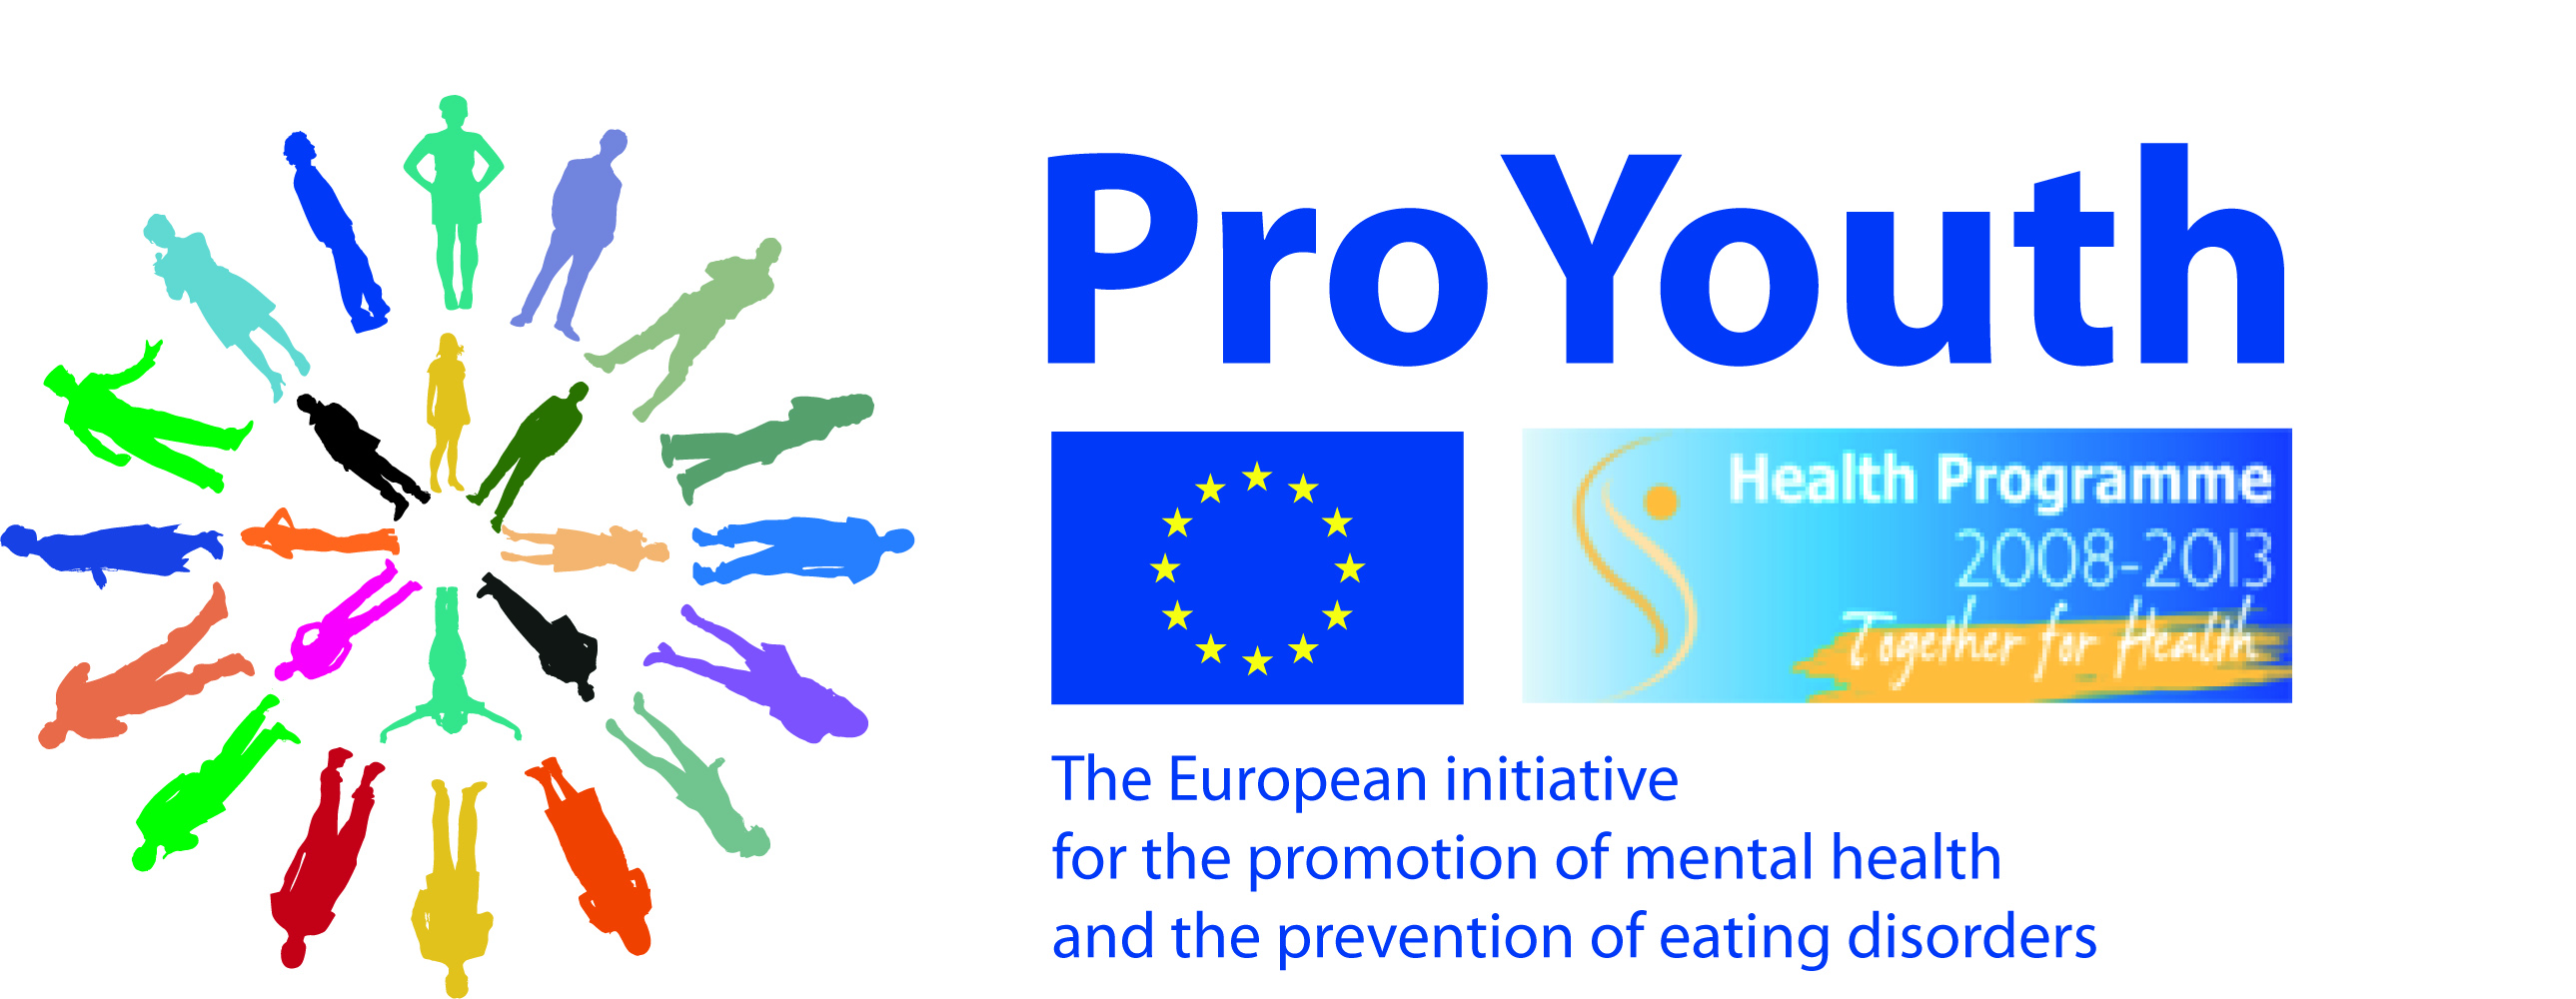 proyouth_logo_vg02